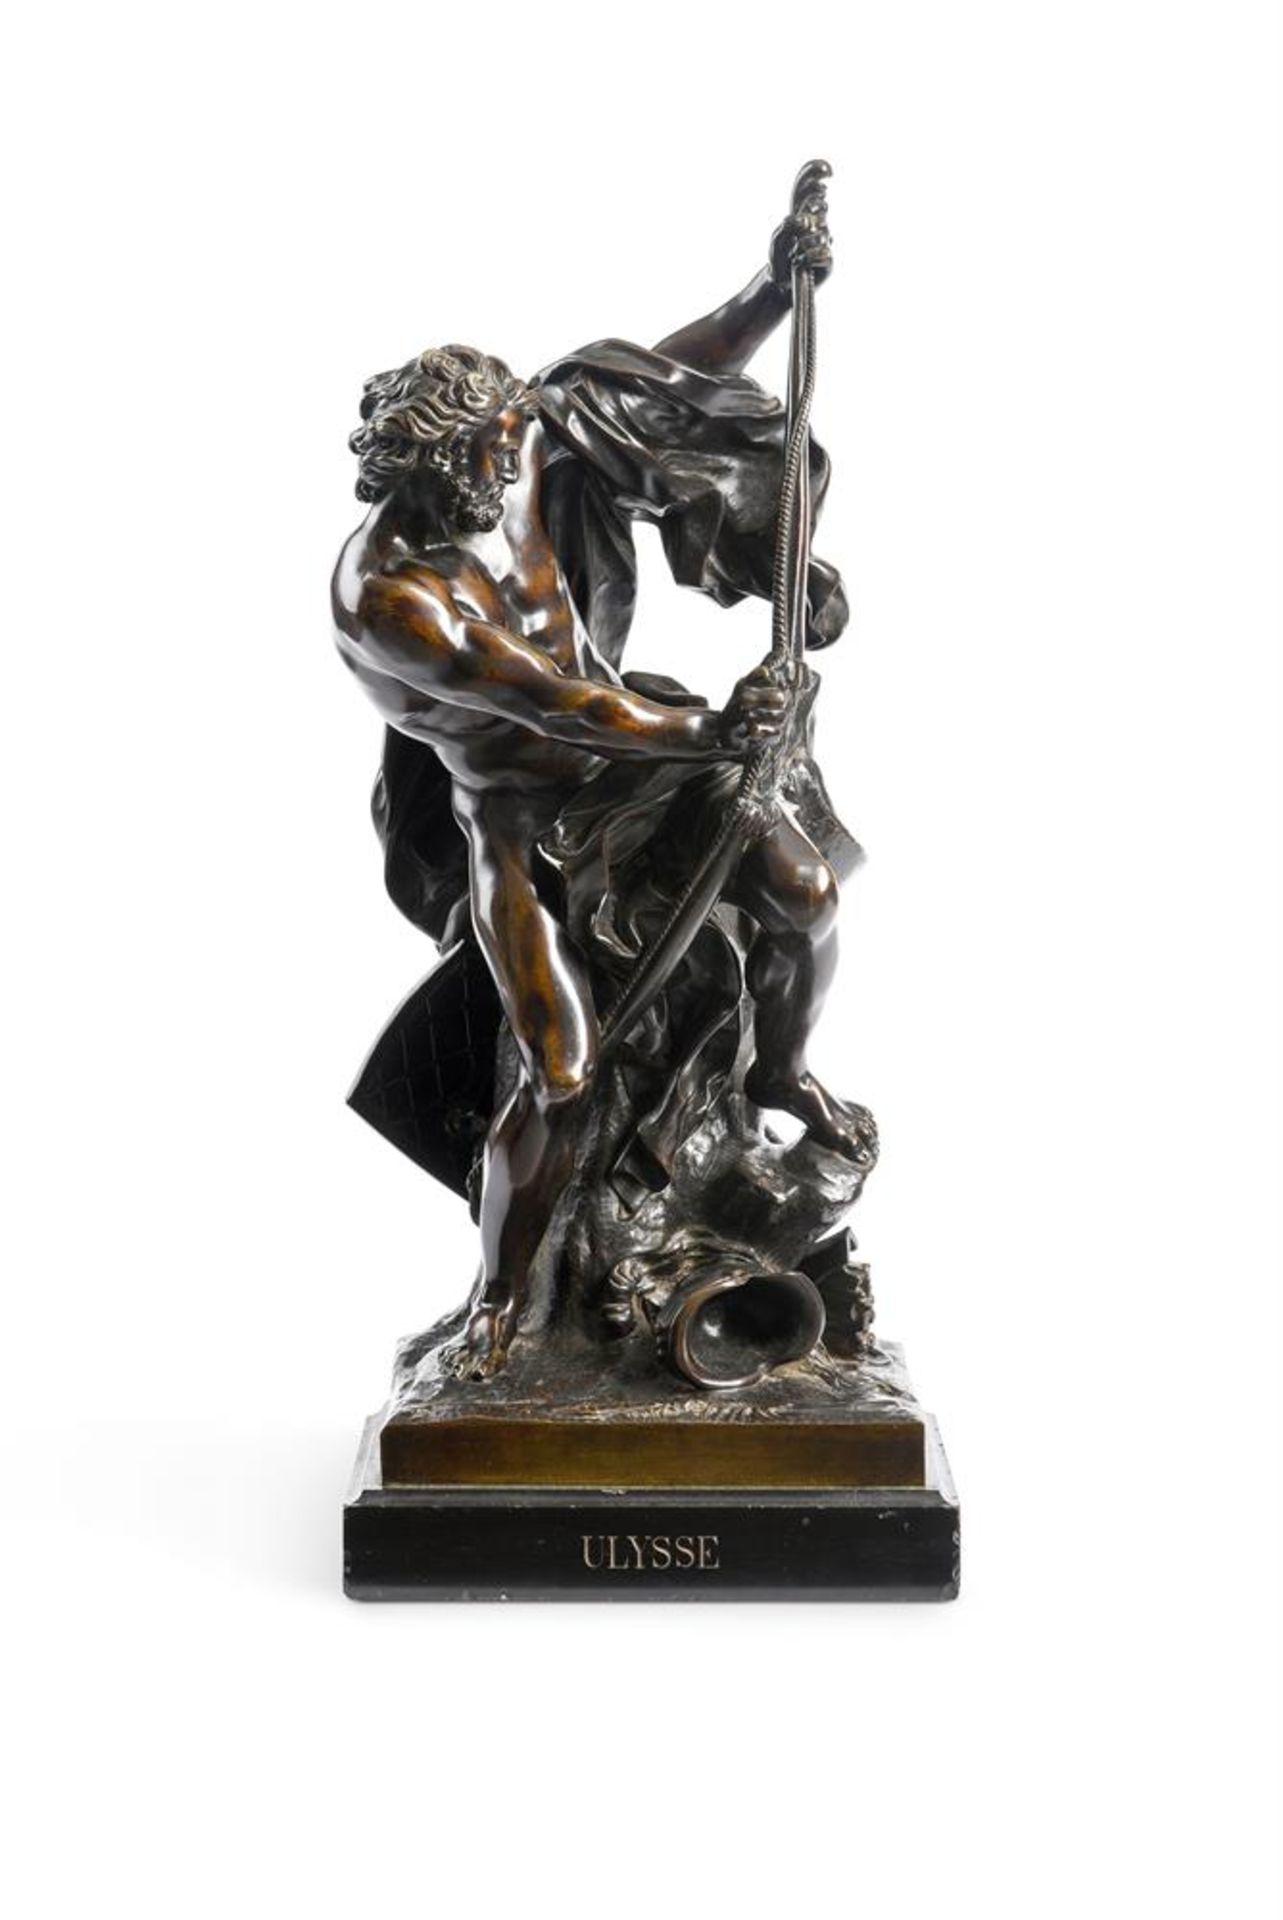 AFTER JACQUES BOUSSEAU (1681-1740), A BRONZE FIGURE OF ULYSSES STRINGING HIS BOW, LATE 19TH CENTURY